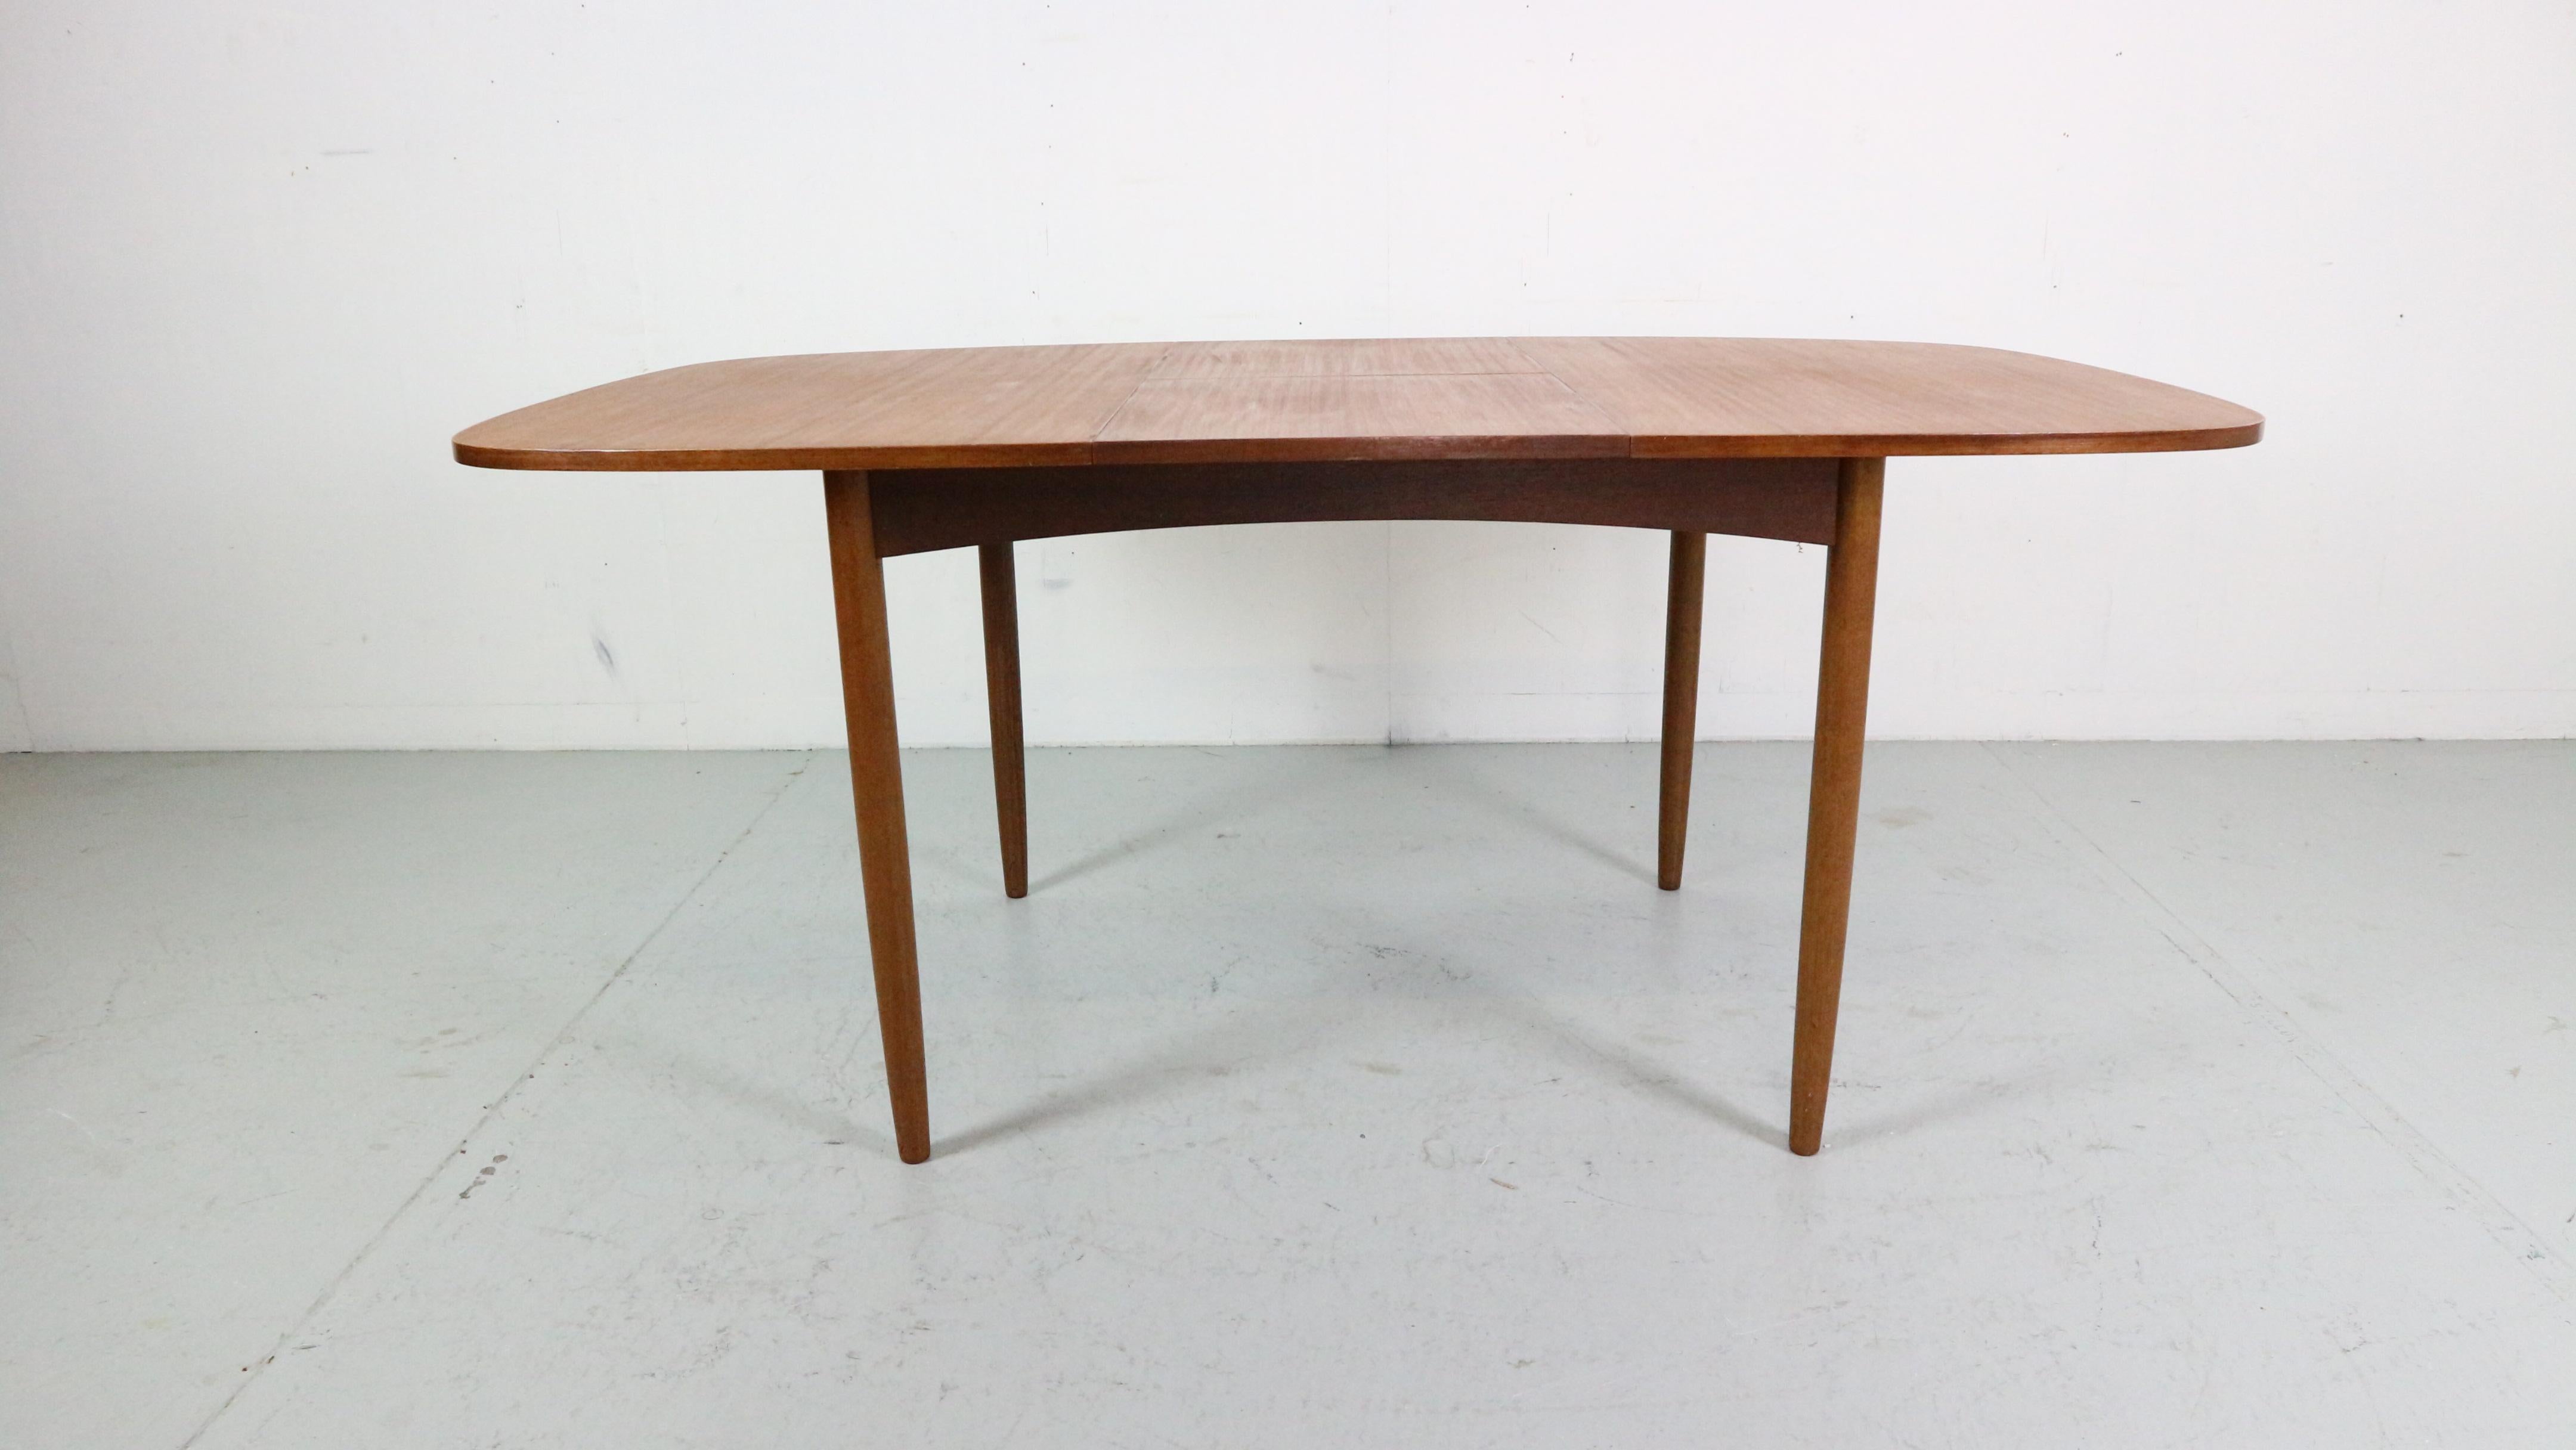 Mid- Century modern period dining room table manufactured and design by famous English furniture maker G Plan, circa 1960's.

Table is made of teak wood and teak veneer.
Has a beautiful oval shape.
Dimensions: W-128cm H-73cm D-99cm.
When extendable-